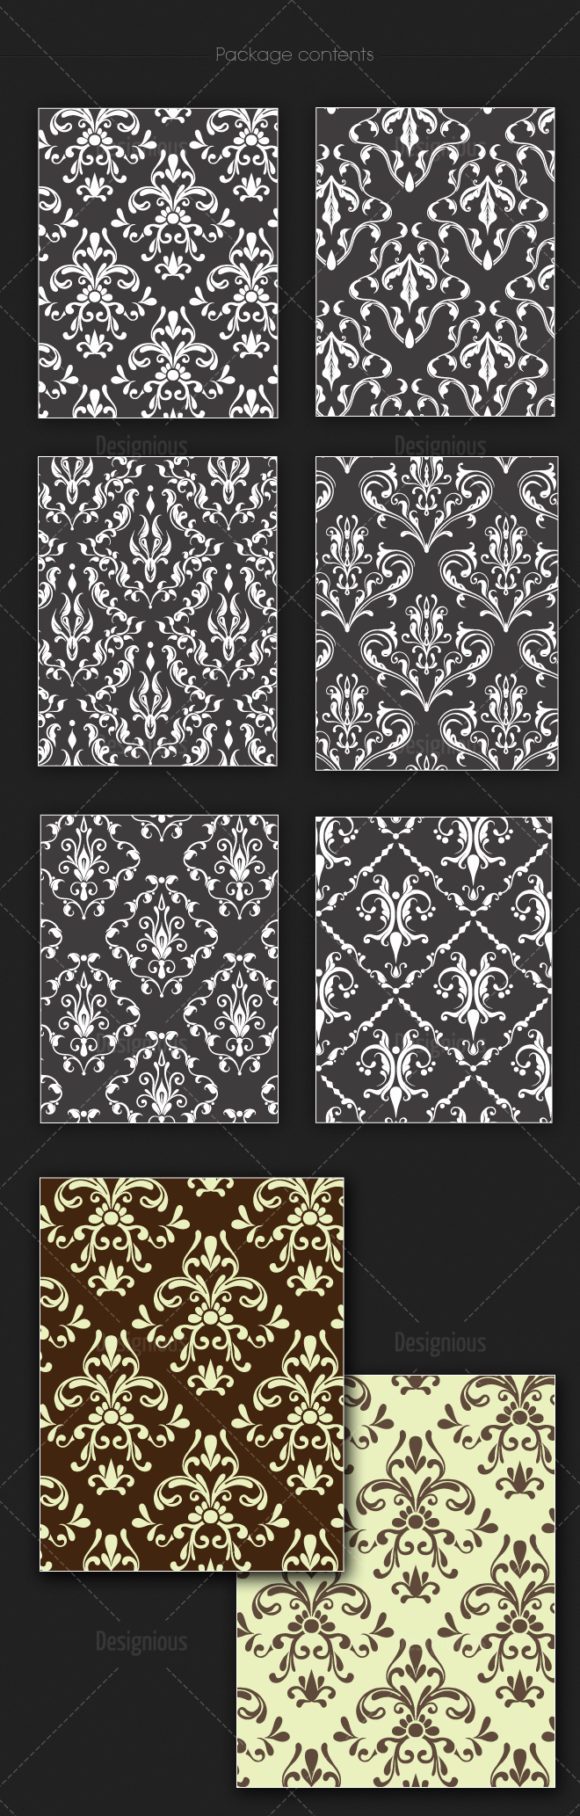 Free Seamless Patterns Vector Pack 132 2